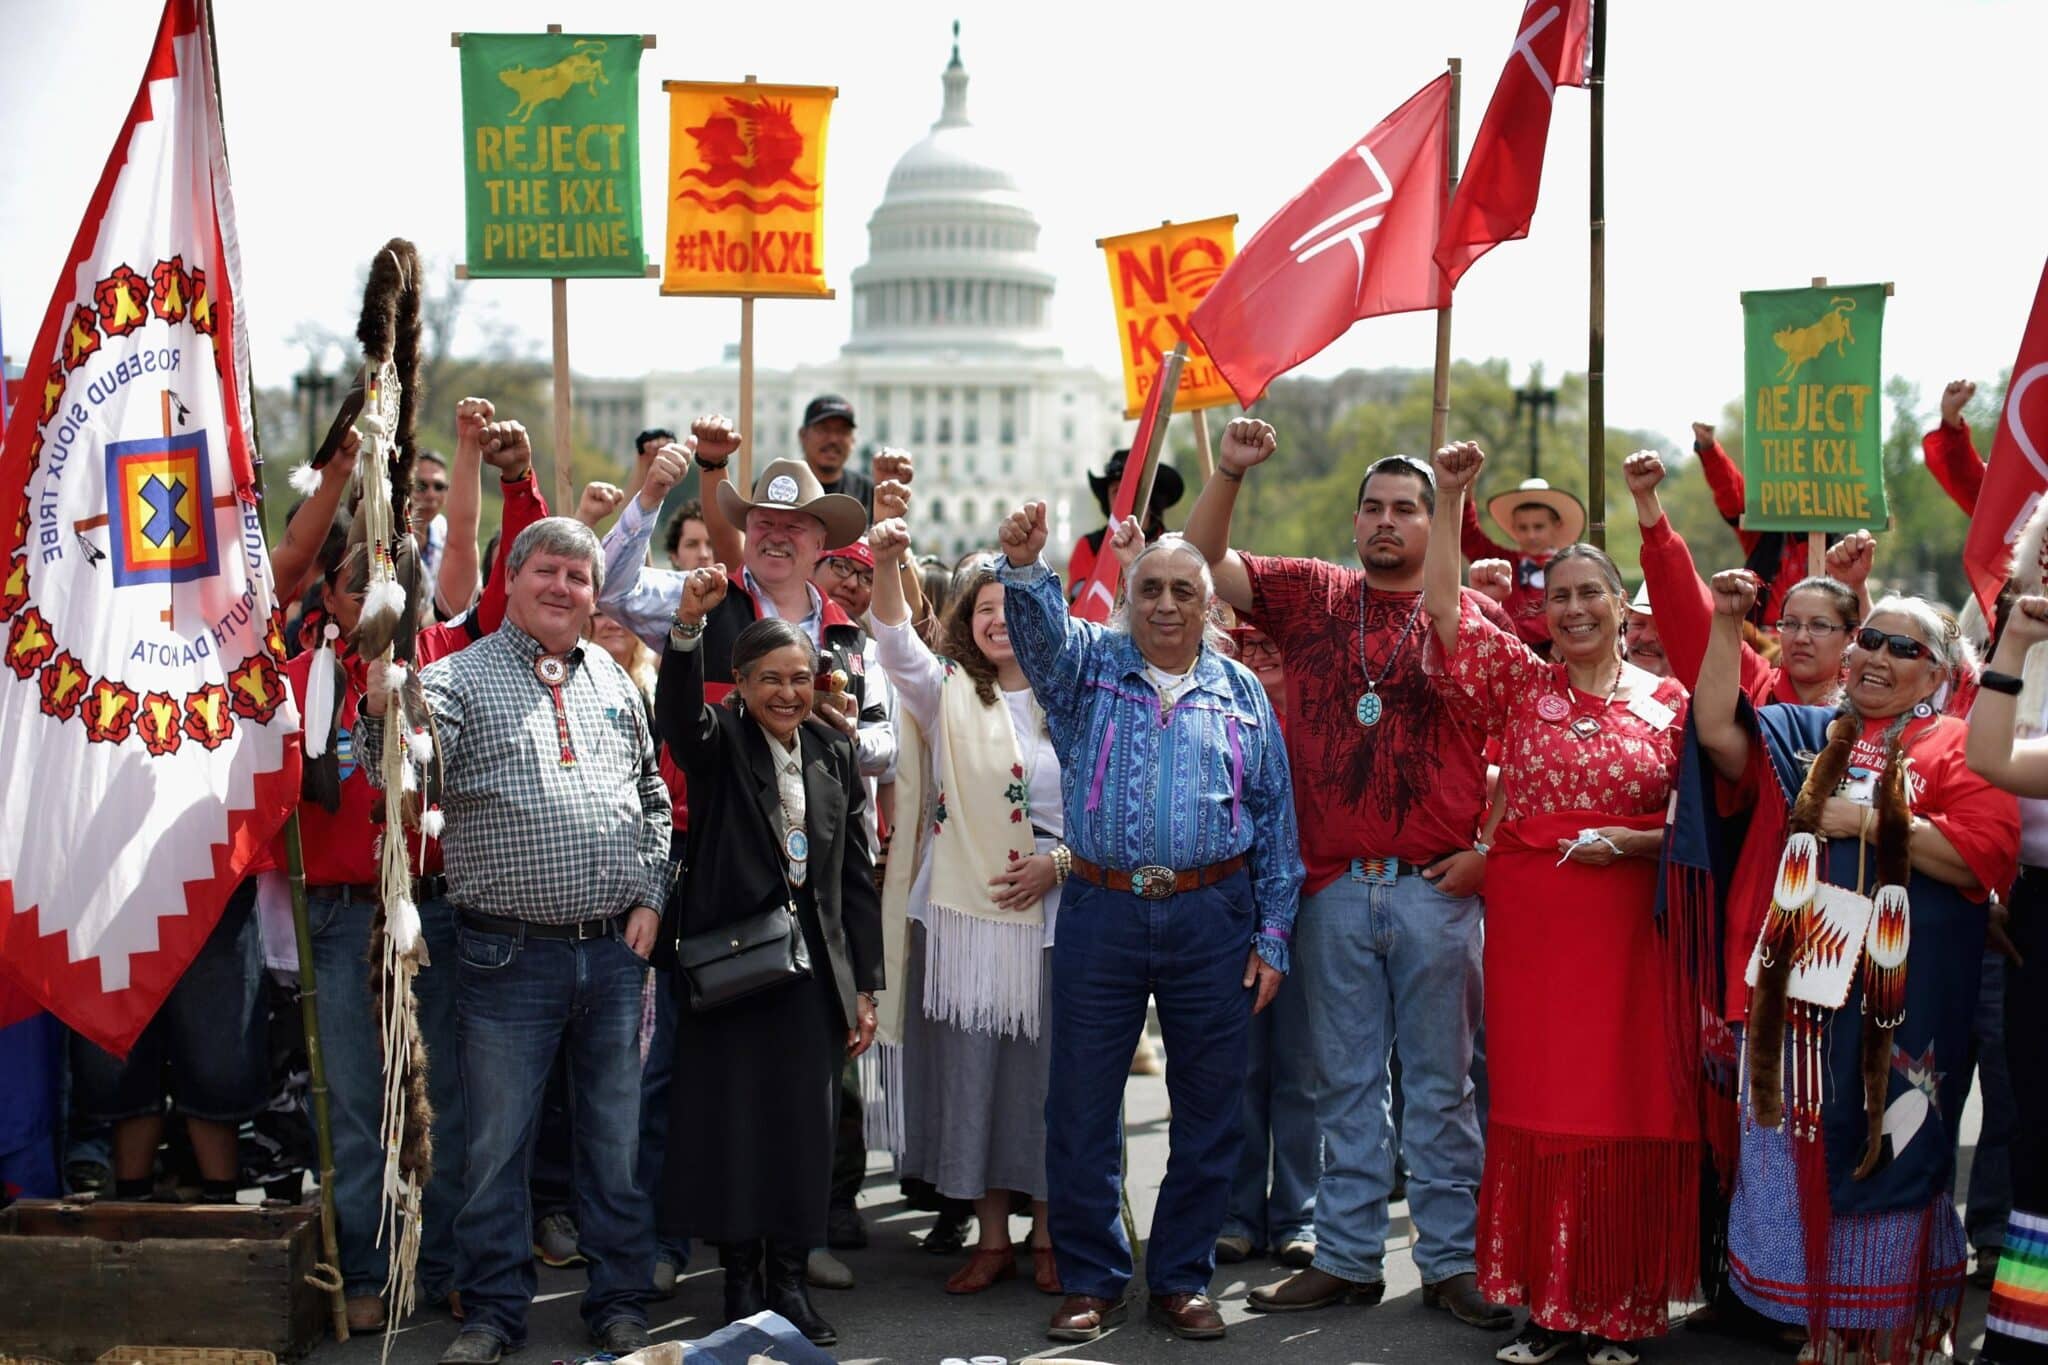 Members of the Cowboy and Indian Alliance standing at demonstration 